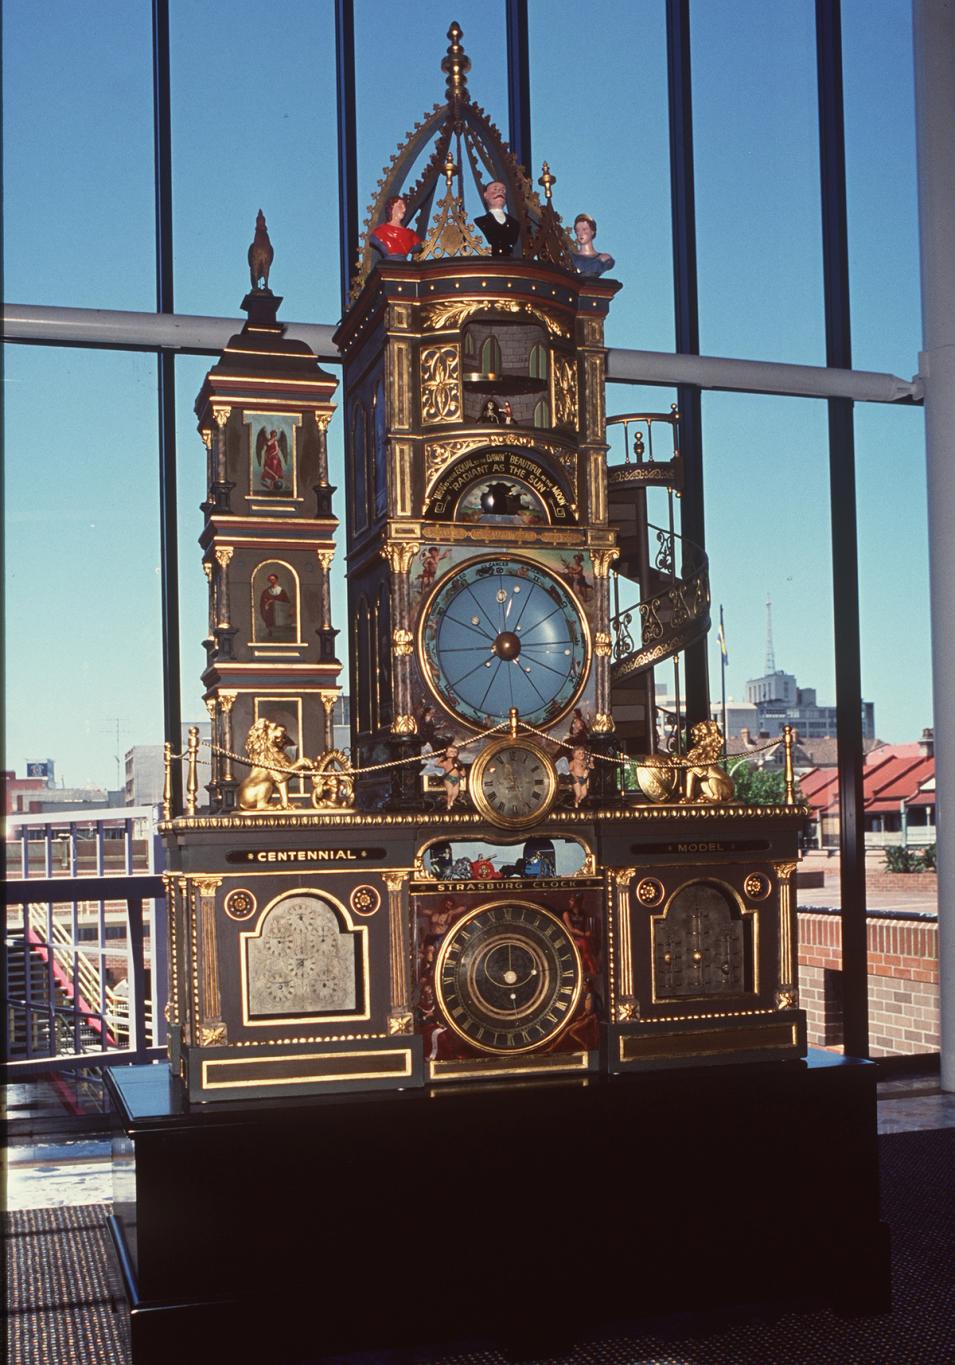 Model based on the astronomical clock in Strasbourg Cathedral, France.